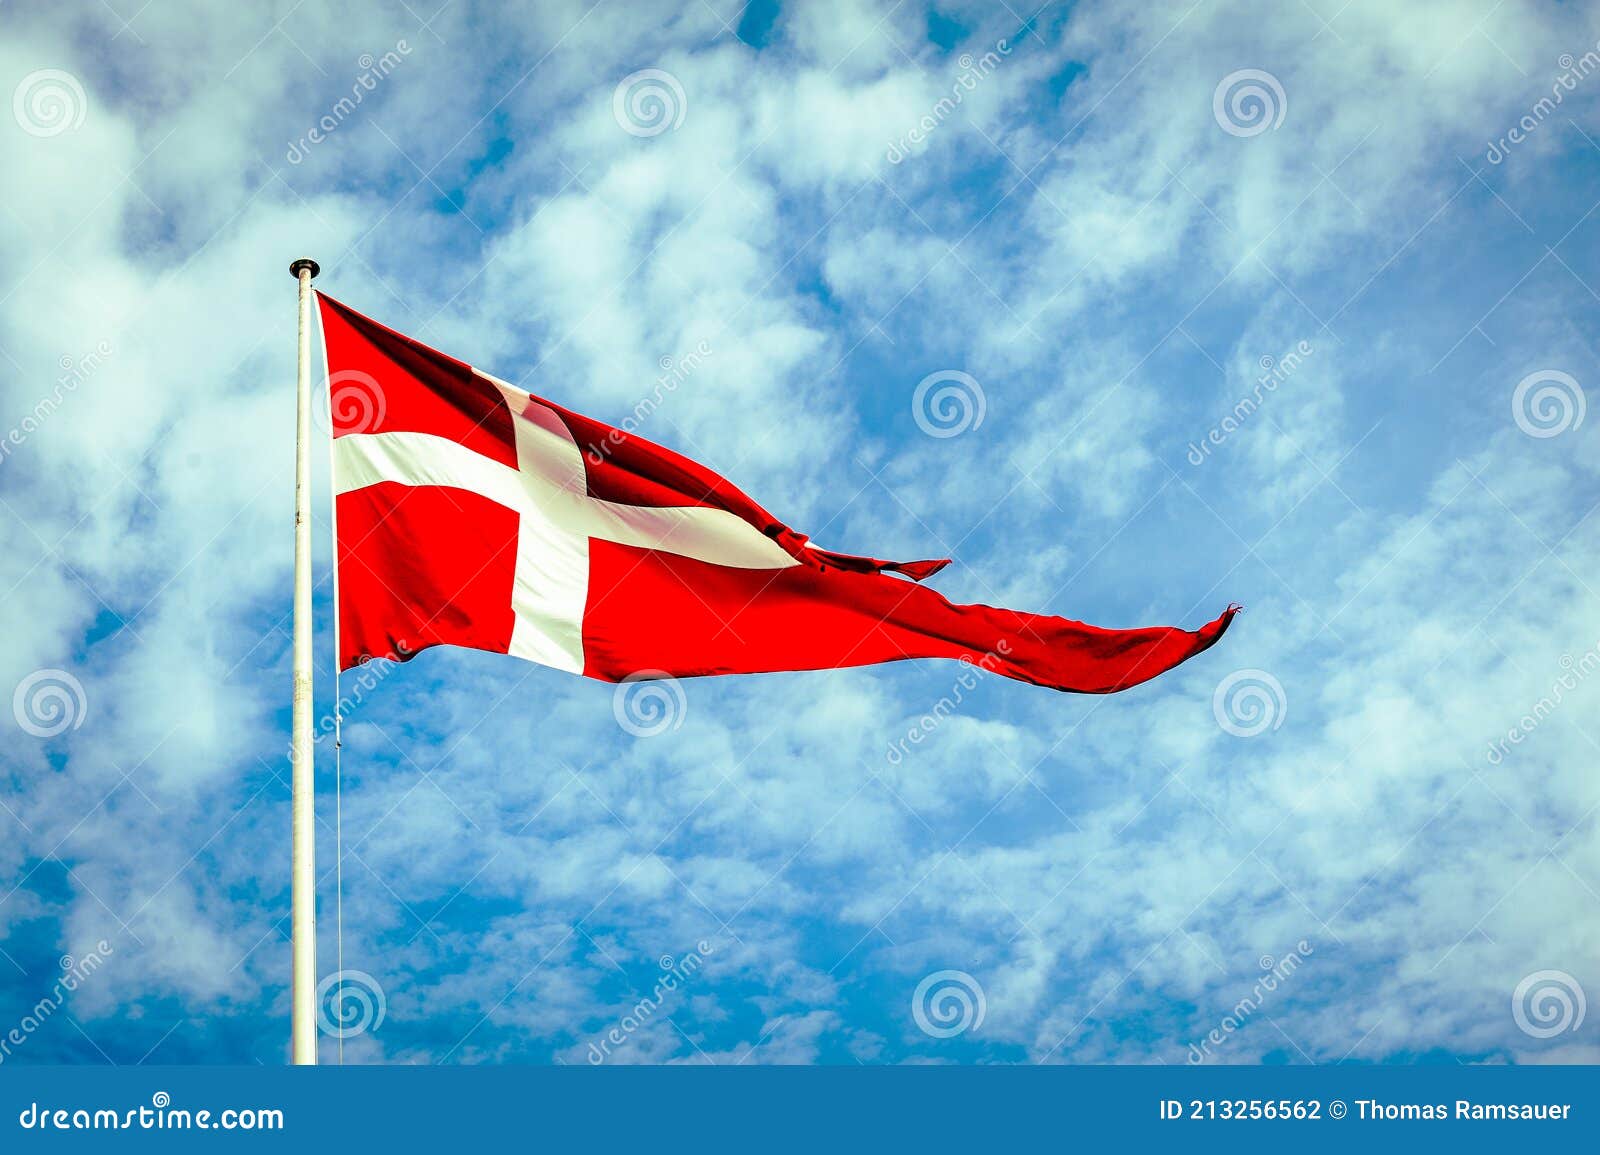 danish flag, the dannebrog, in front of a blue and cloudy sky.